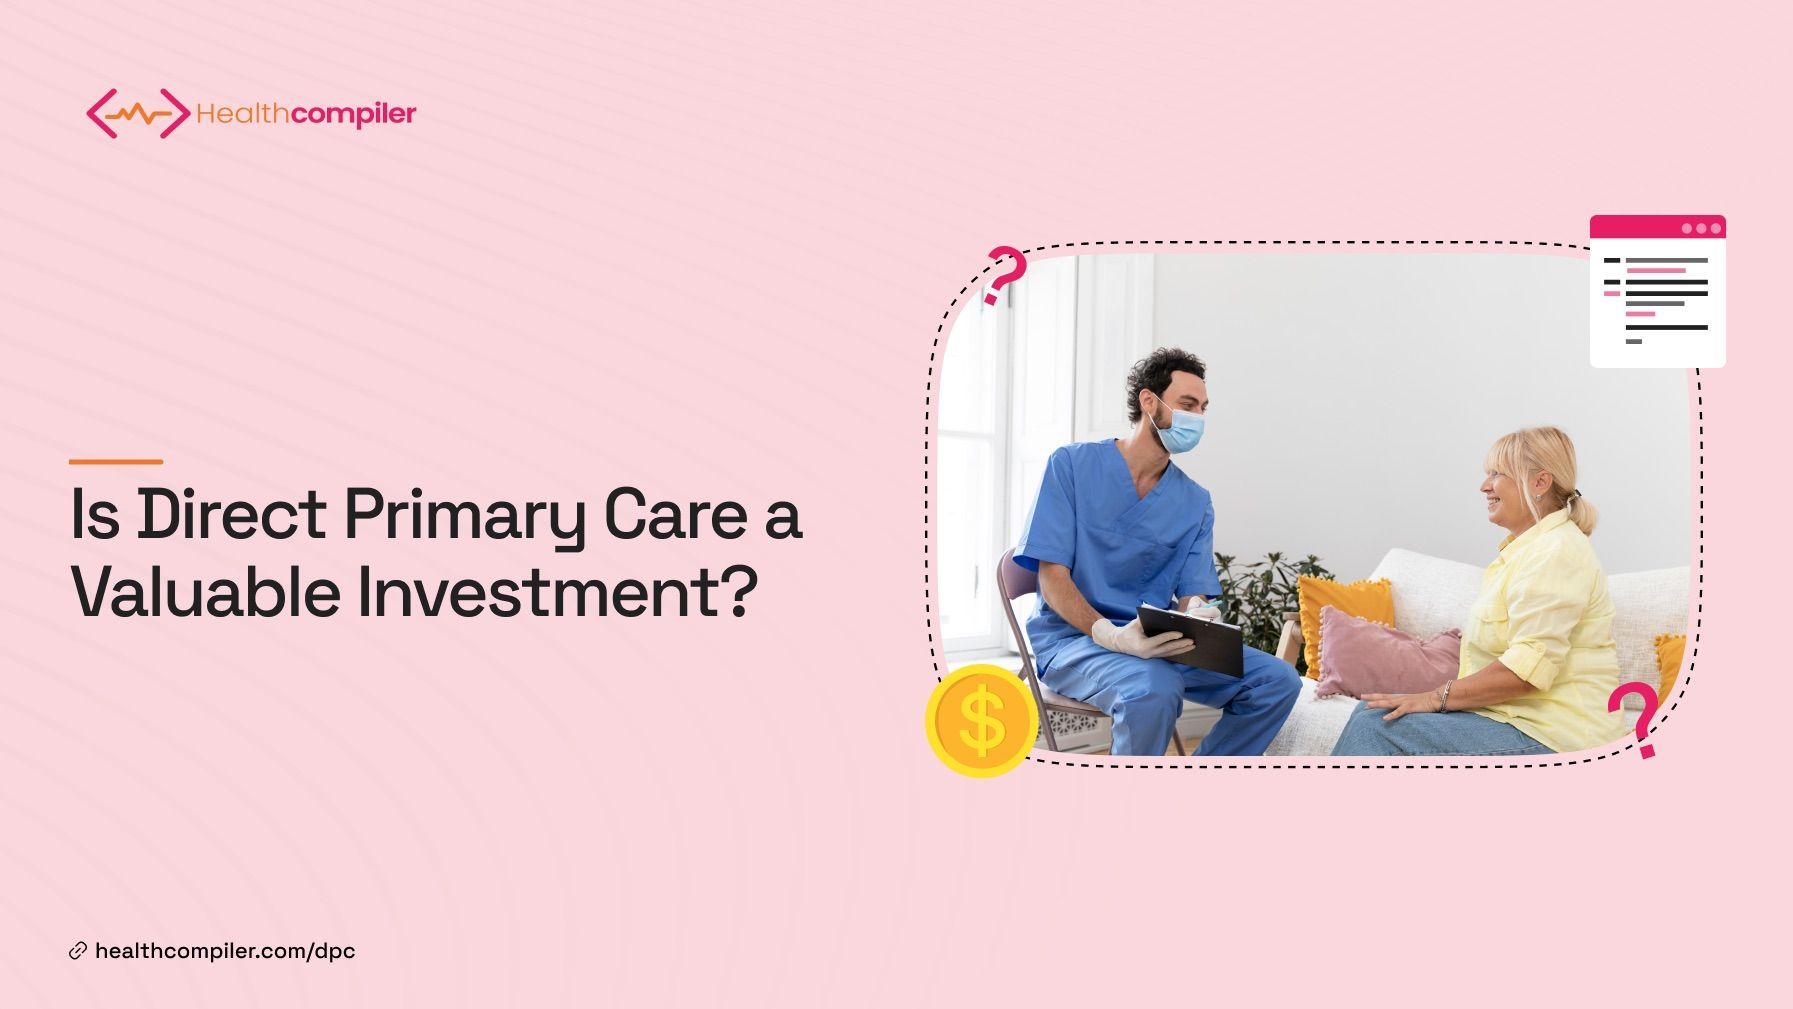 Direct Primary Care a Valuable Investment?